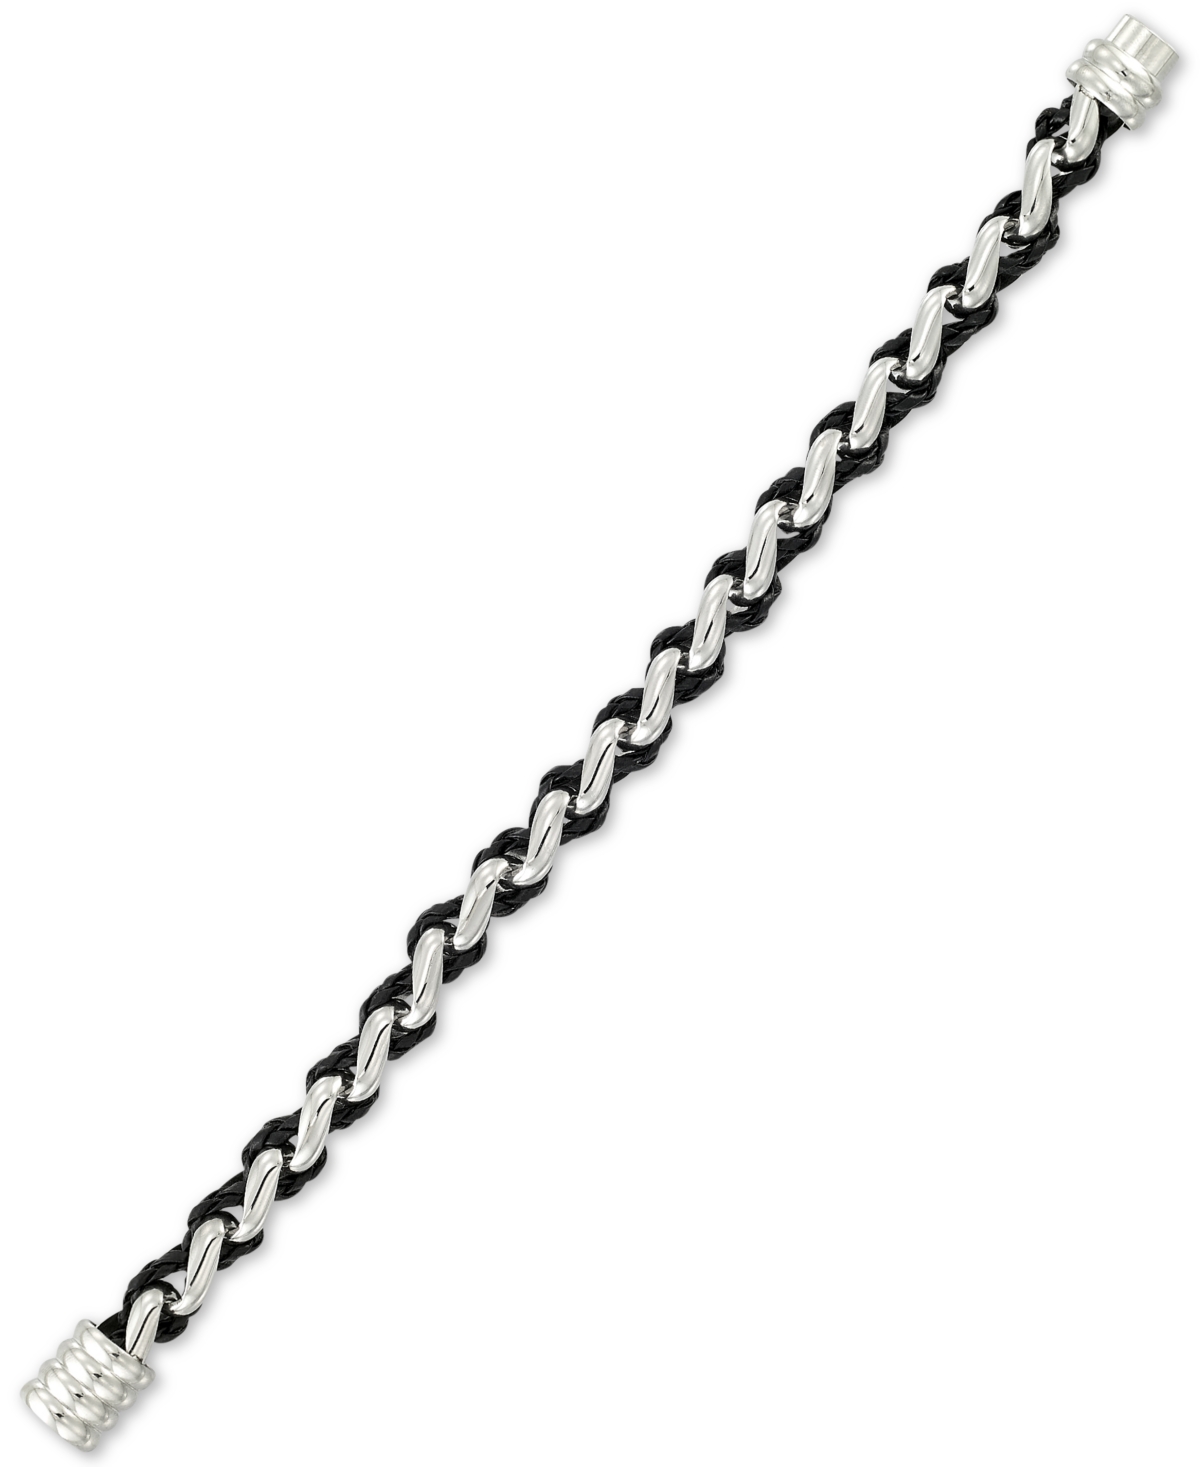 Smith Black Leather Braided Bracelet in Stainless Steel - Stainless Steel